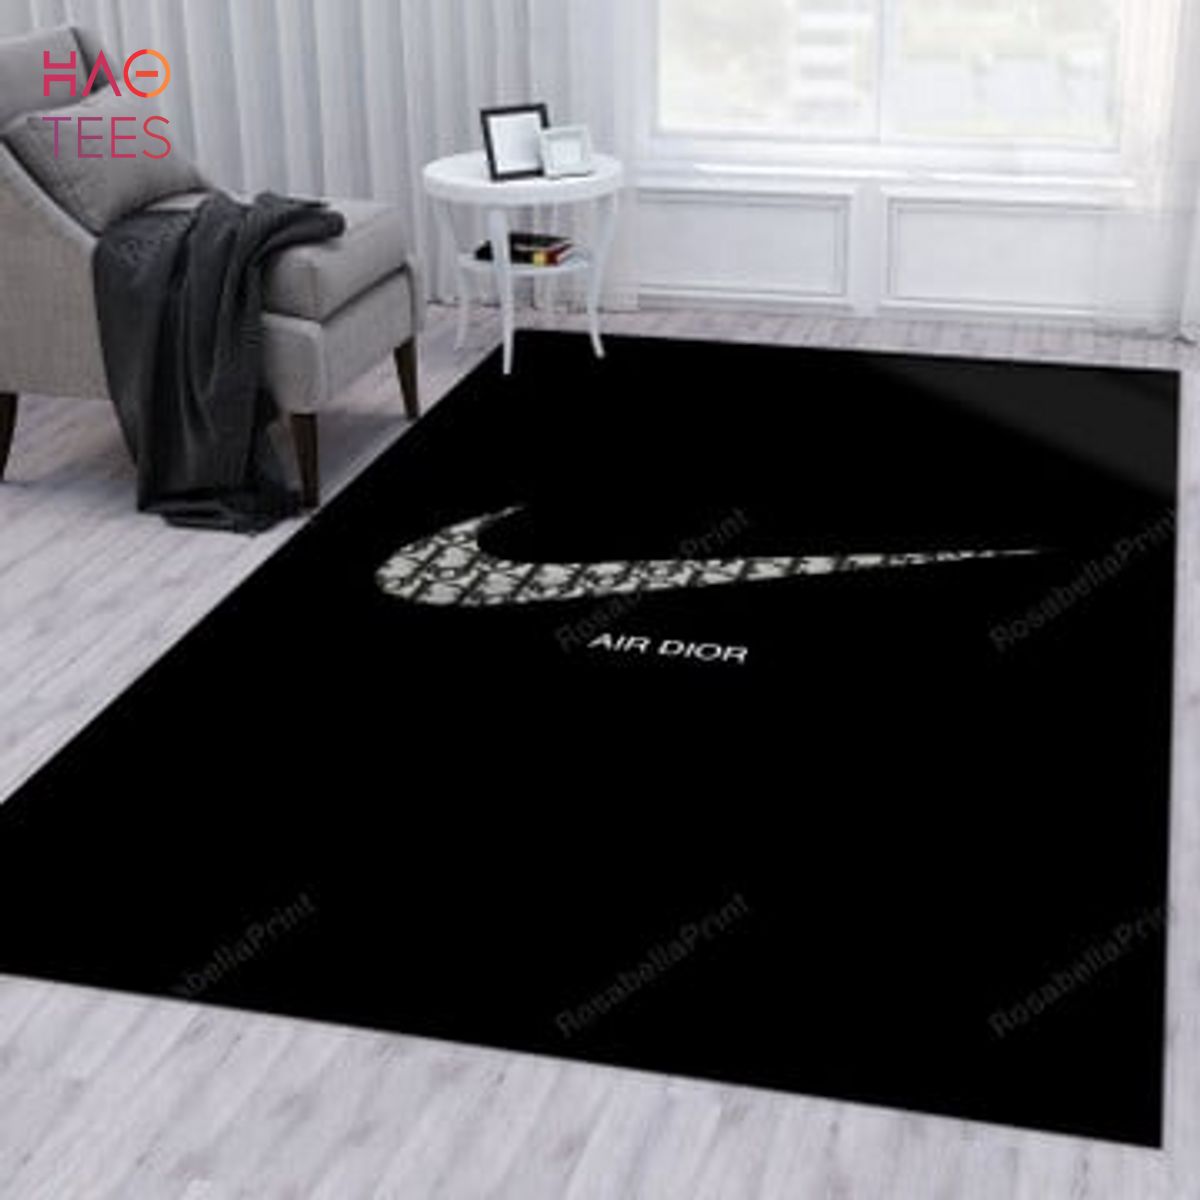 Dior Fashion Brand Rectangle Rug Decor Area Rugs For Living Room Bedroom Kitchen Rugs